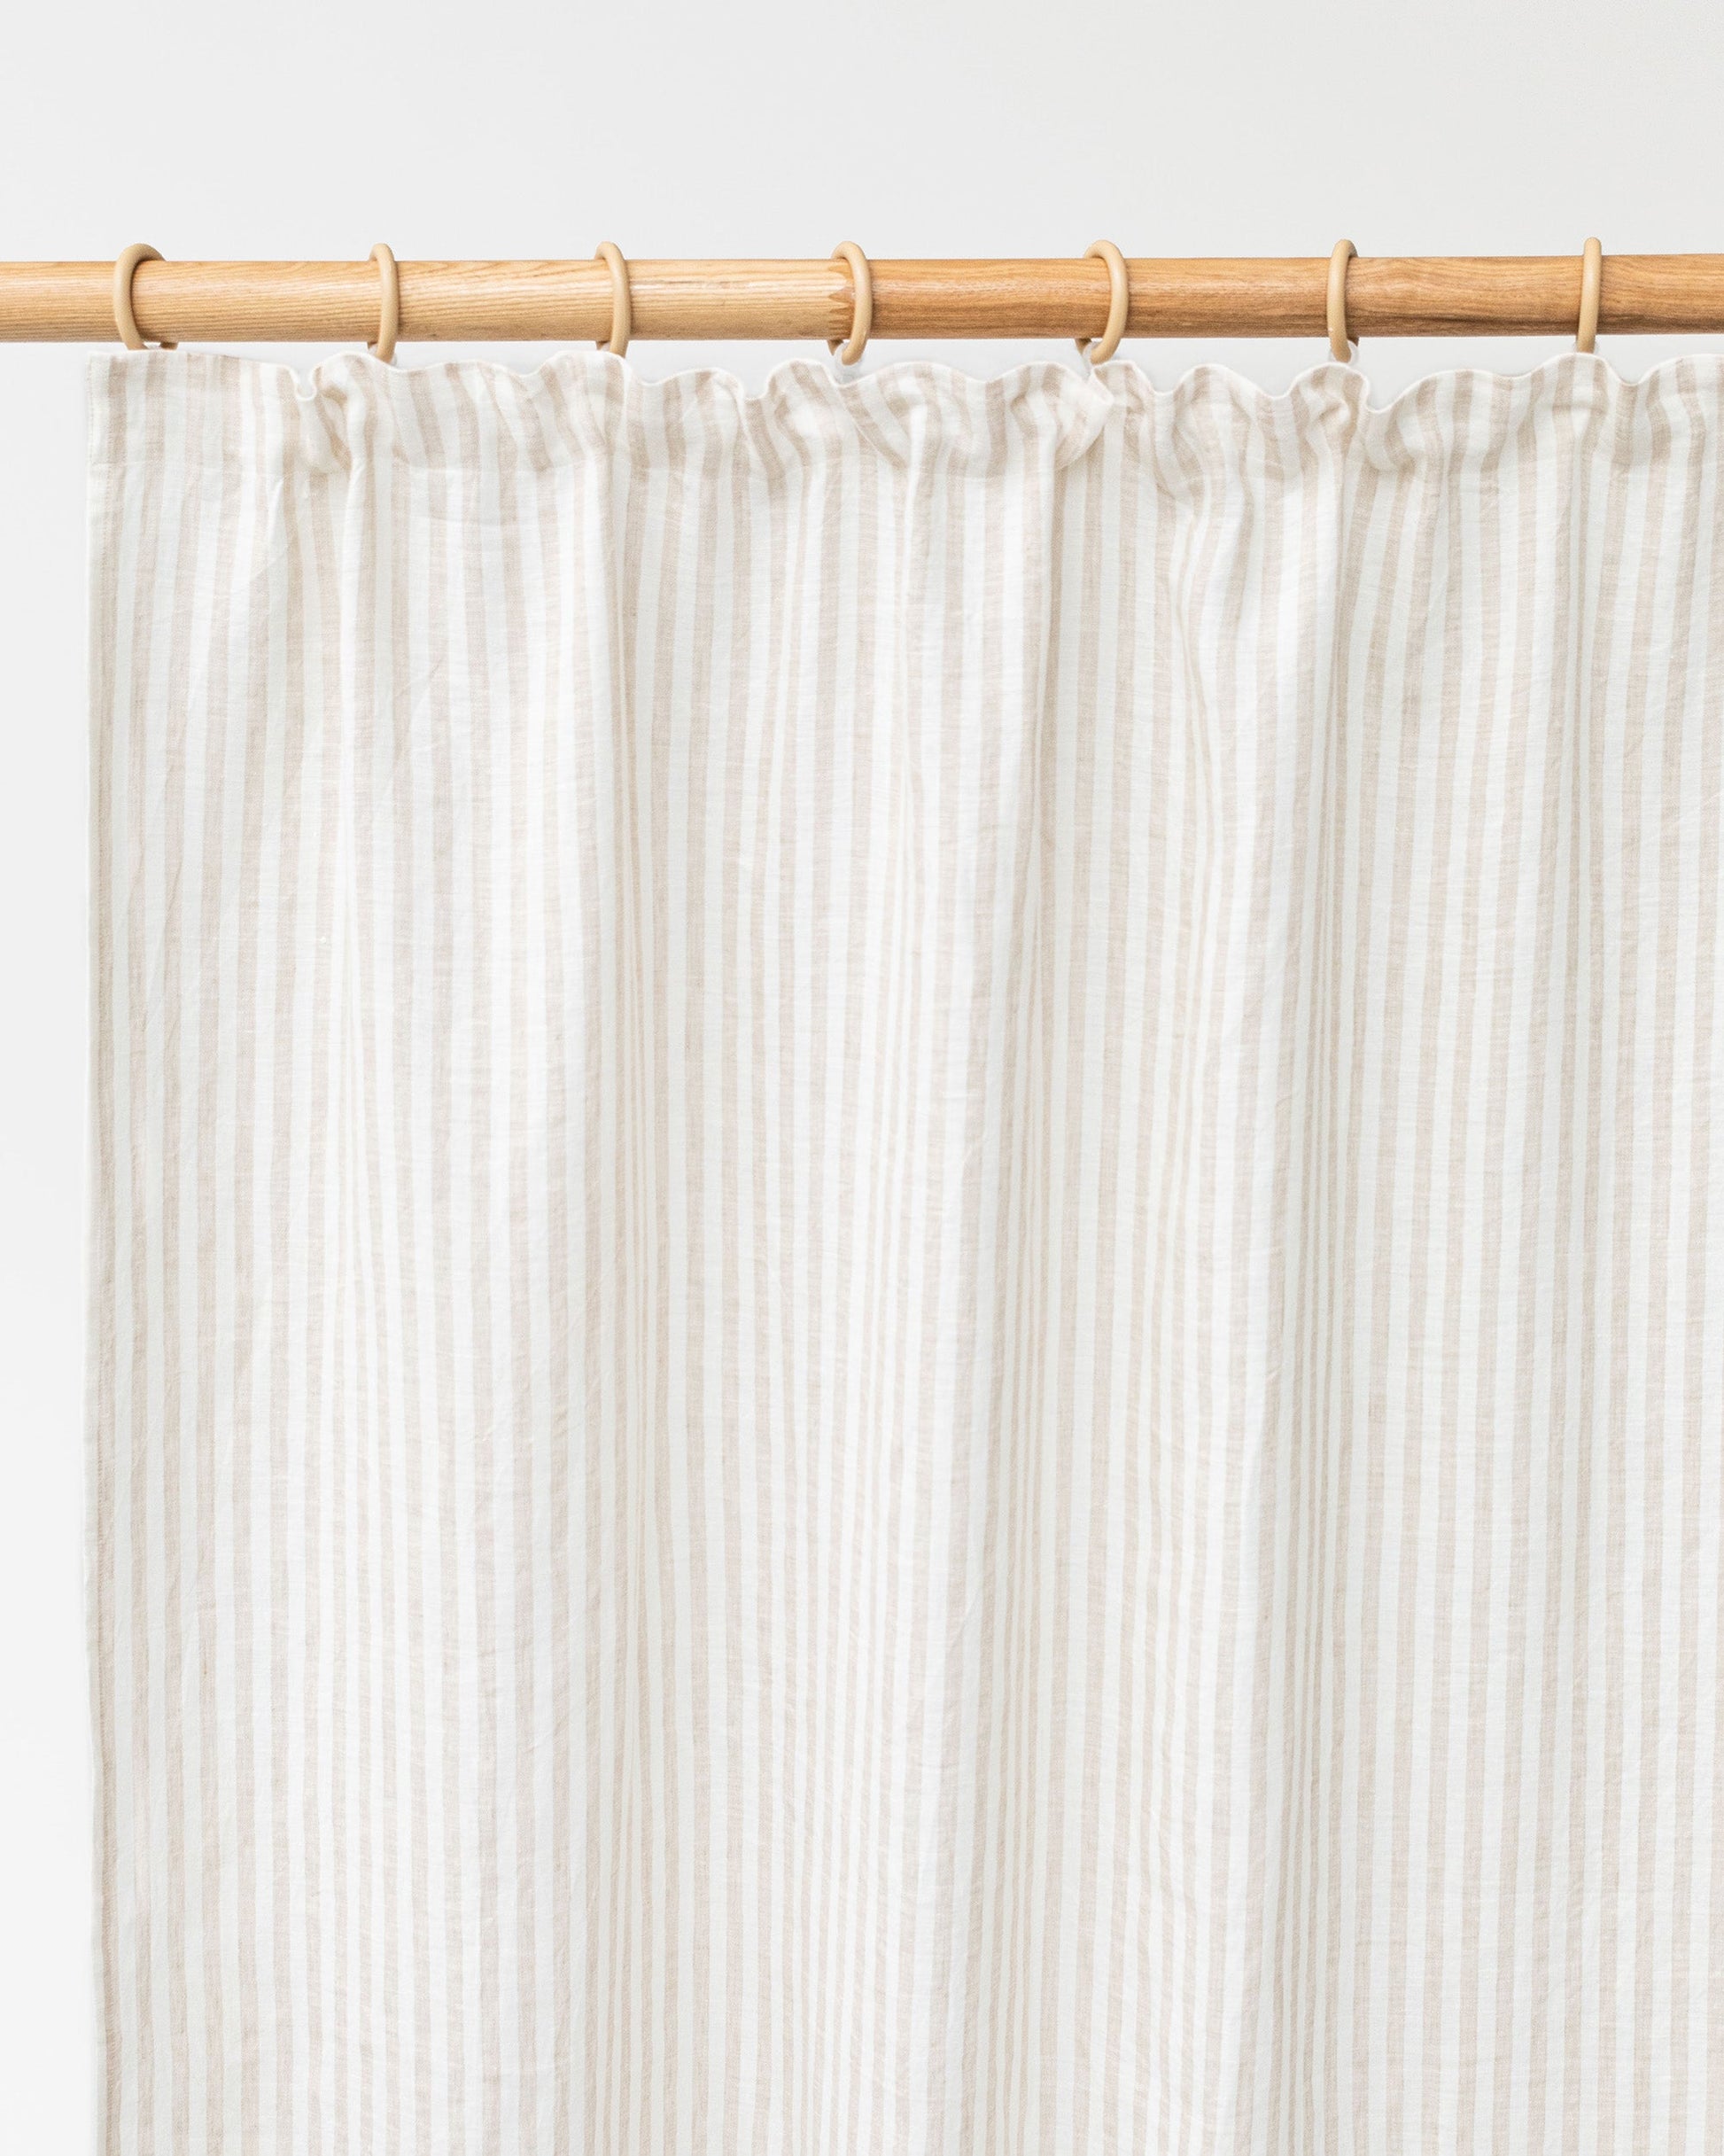 Custom size pencil pleat linen curtain panel (1 pcs) in Striped in natural - MagicLinen